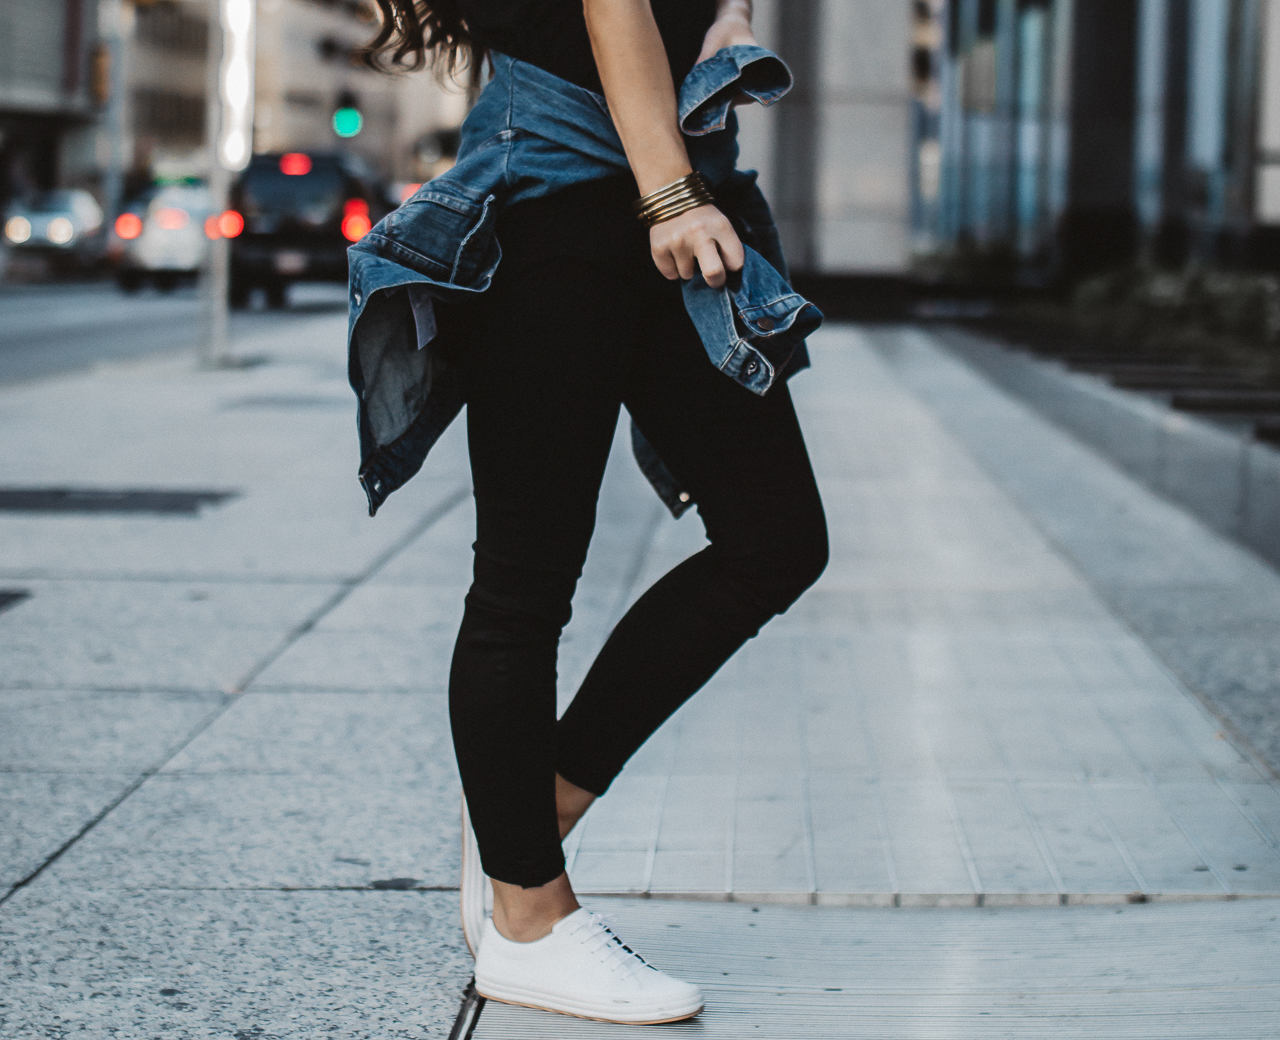 white sneakers with jeans